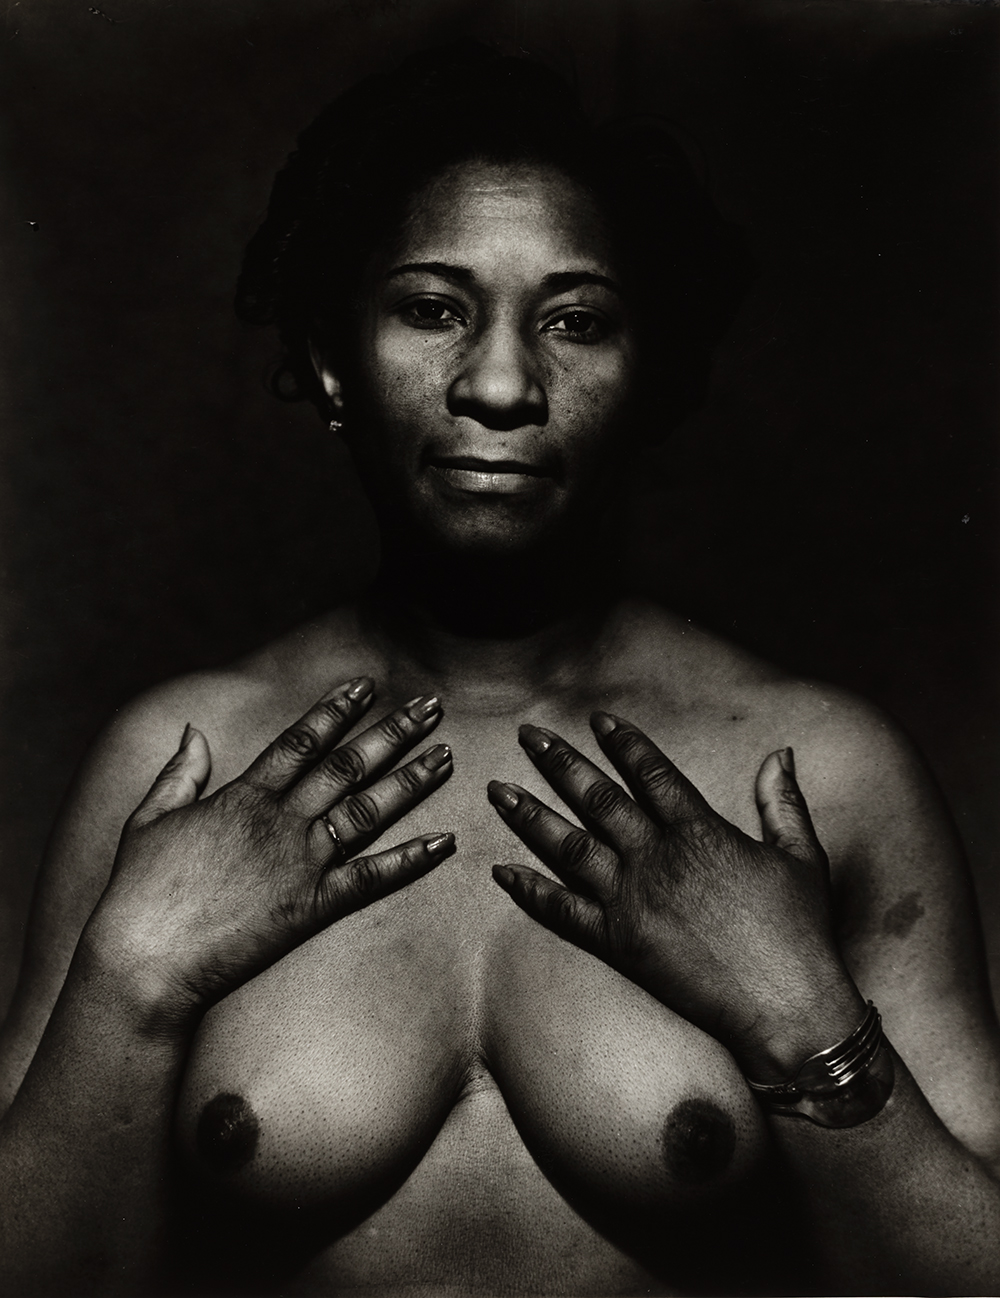 Photograph of a nude Black woman shown from the waist up facing the viewer with both hands on upper chest